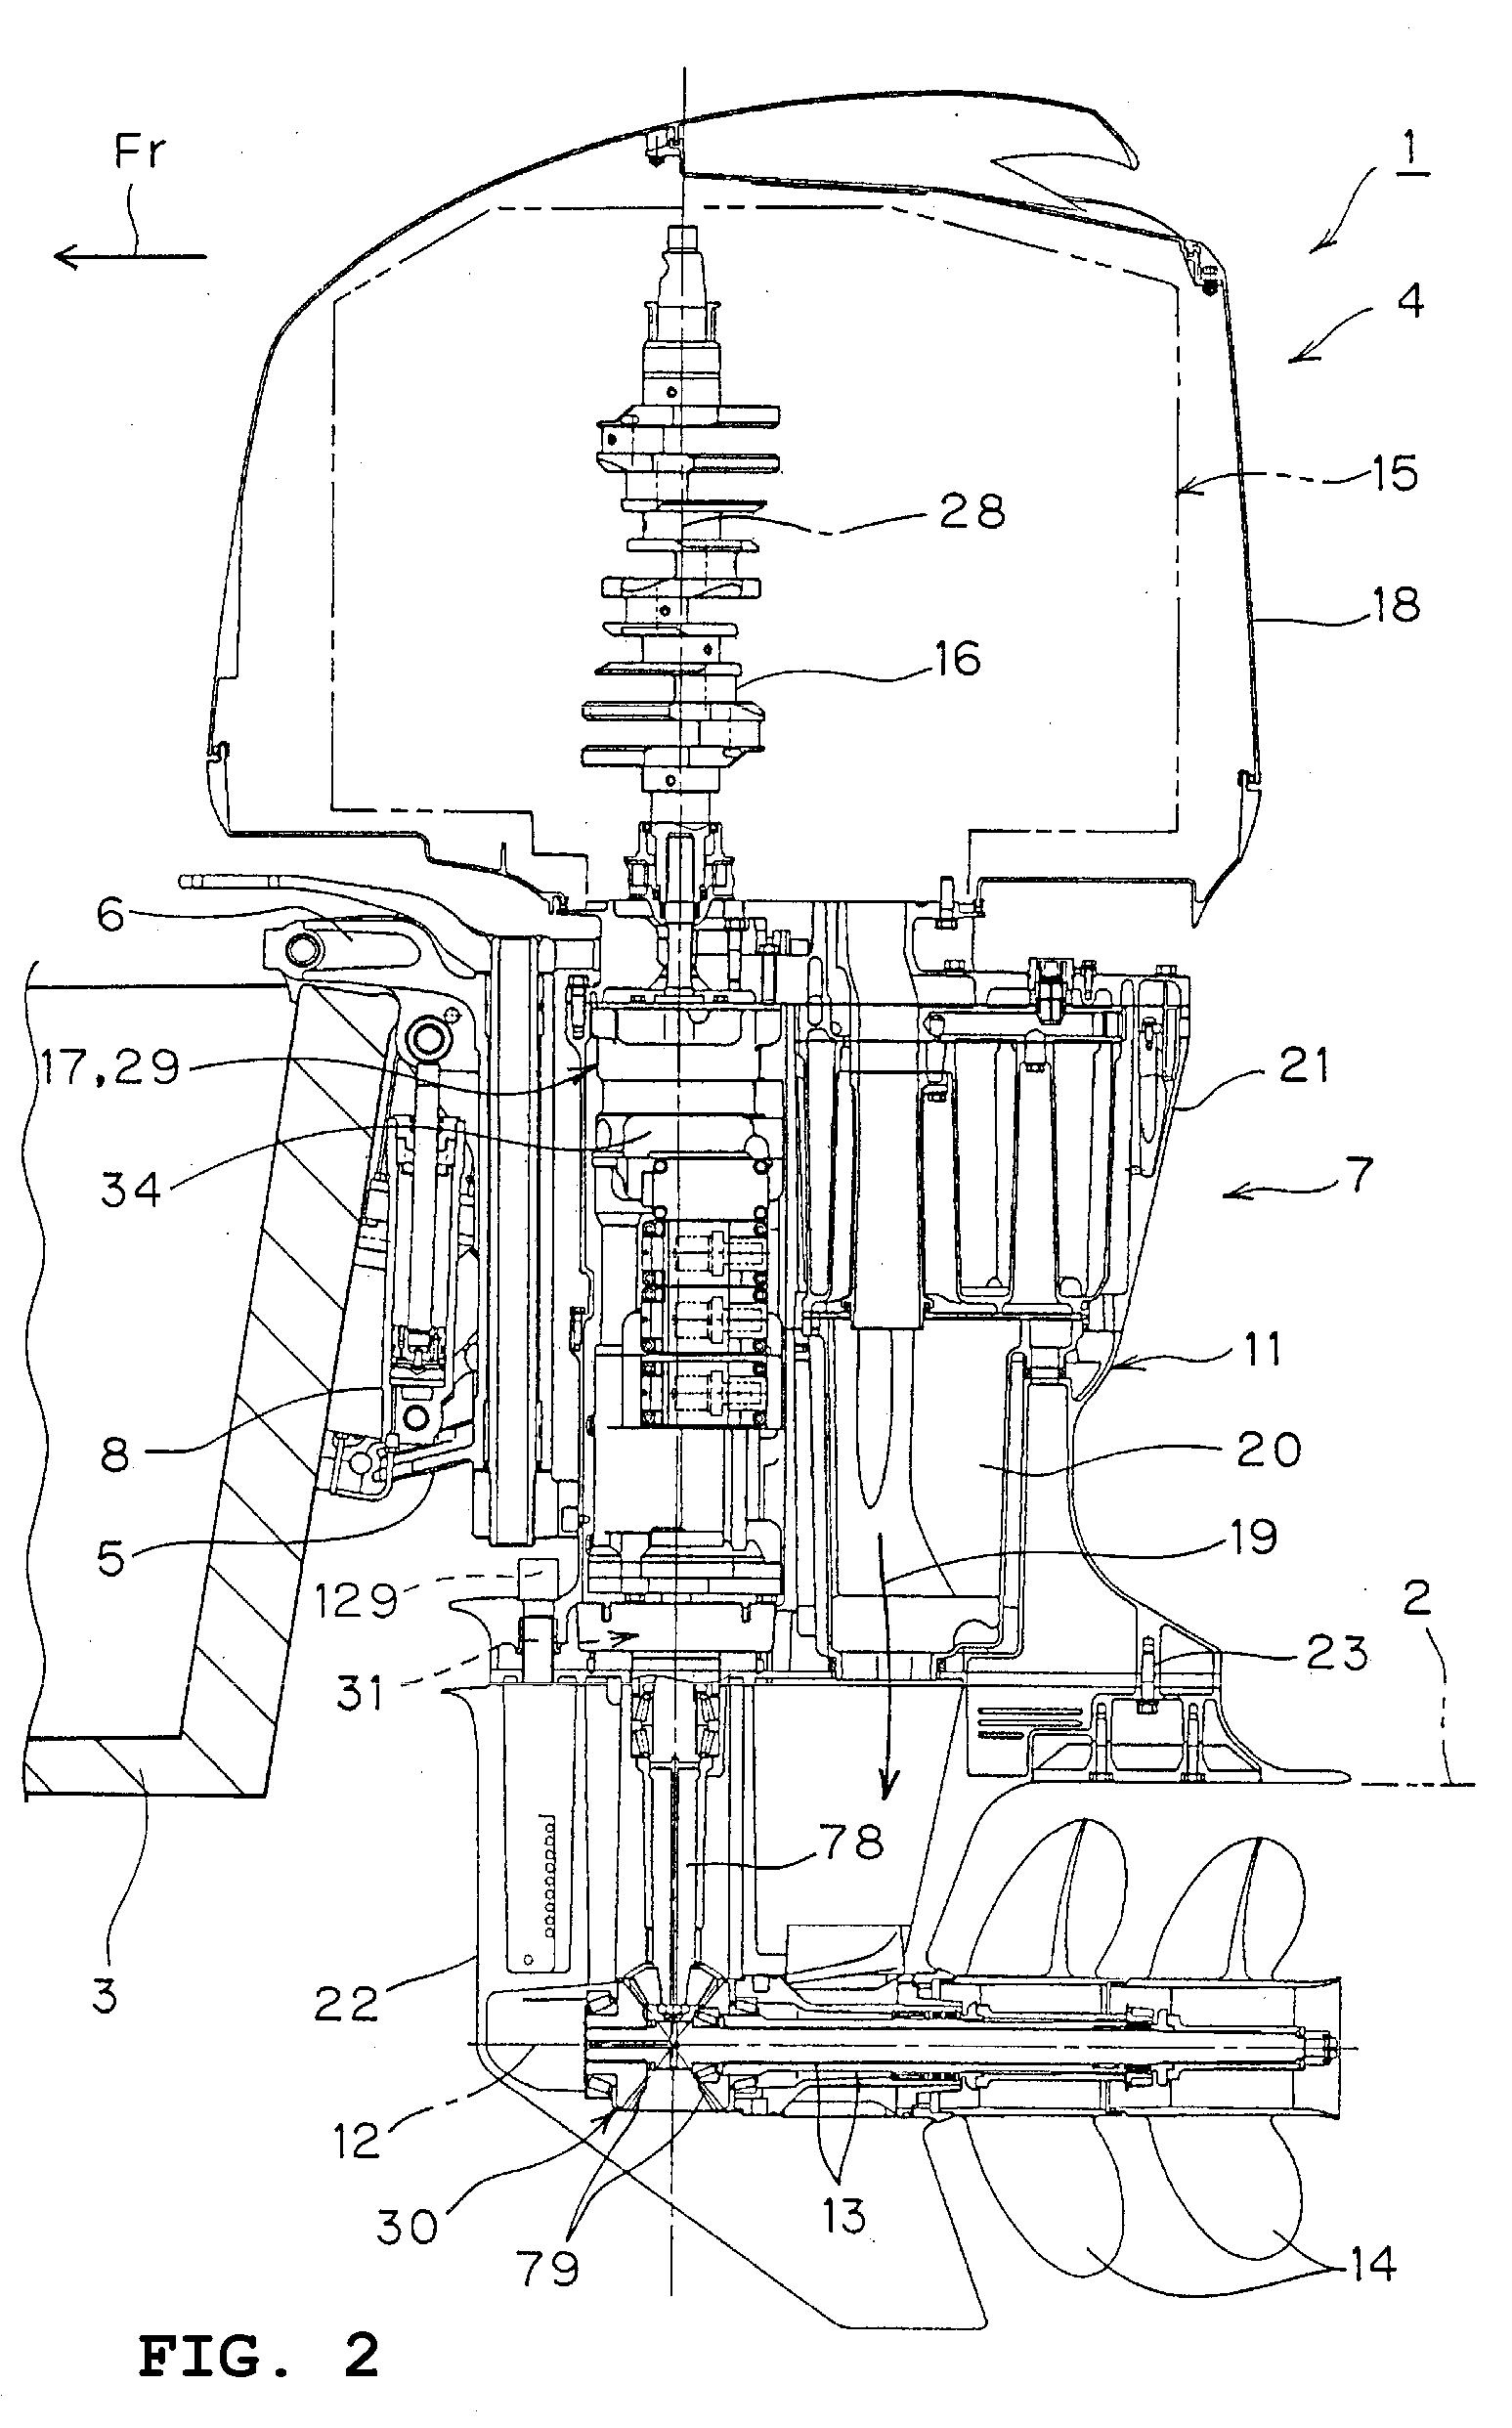 Water cooling apparatus in power transmission system of boat propulsion unit